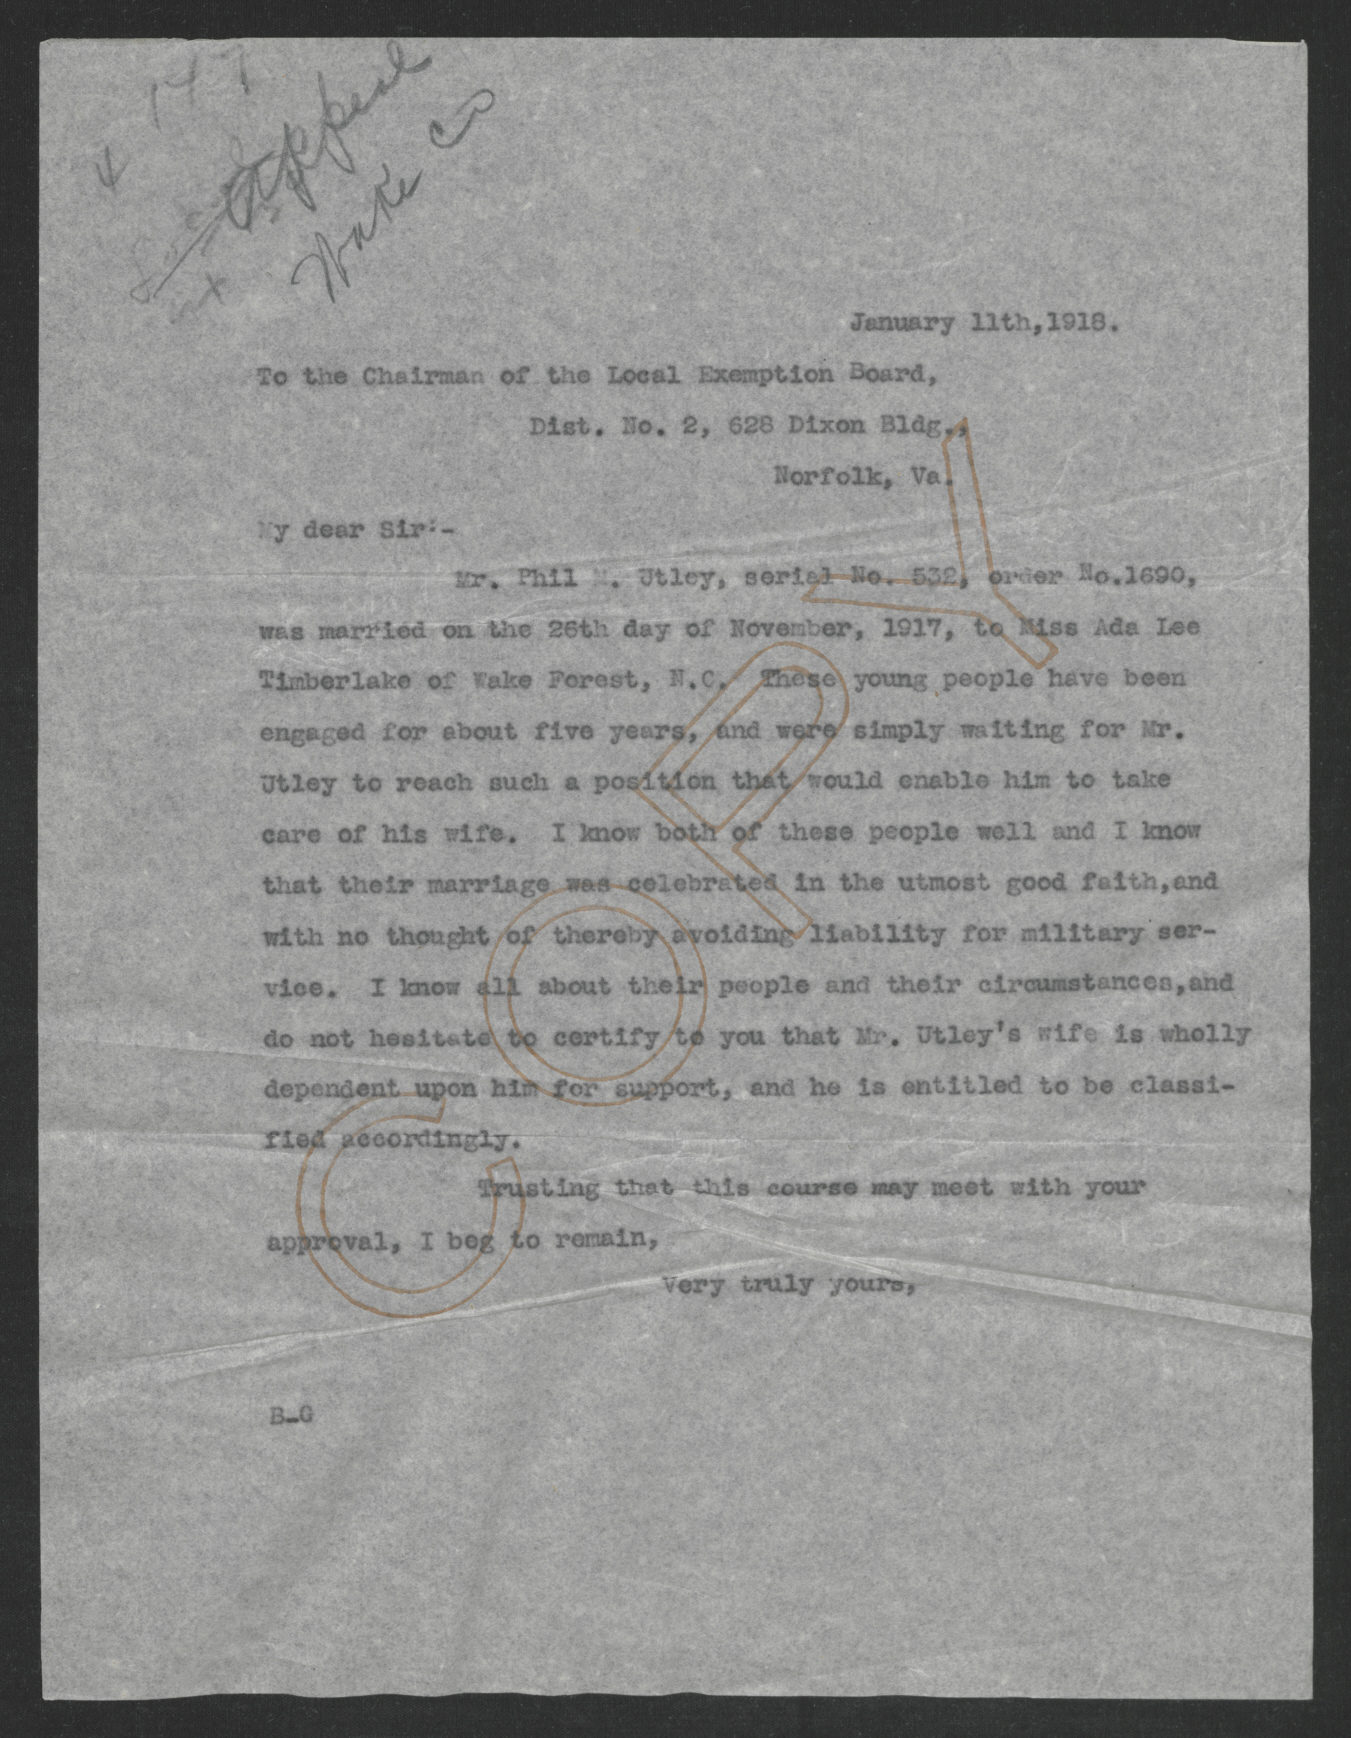 Letter from Thomas W. Bickett to the Chairman of the Local Exemption Board in Norfolk, January 11, 1918